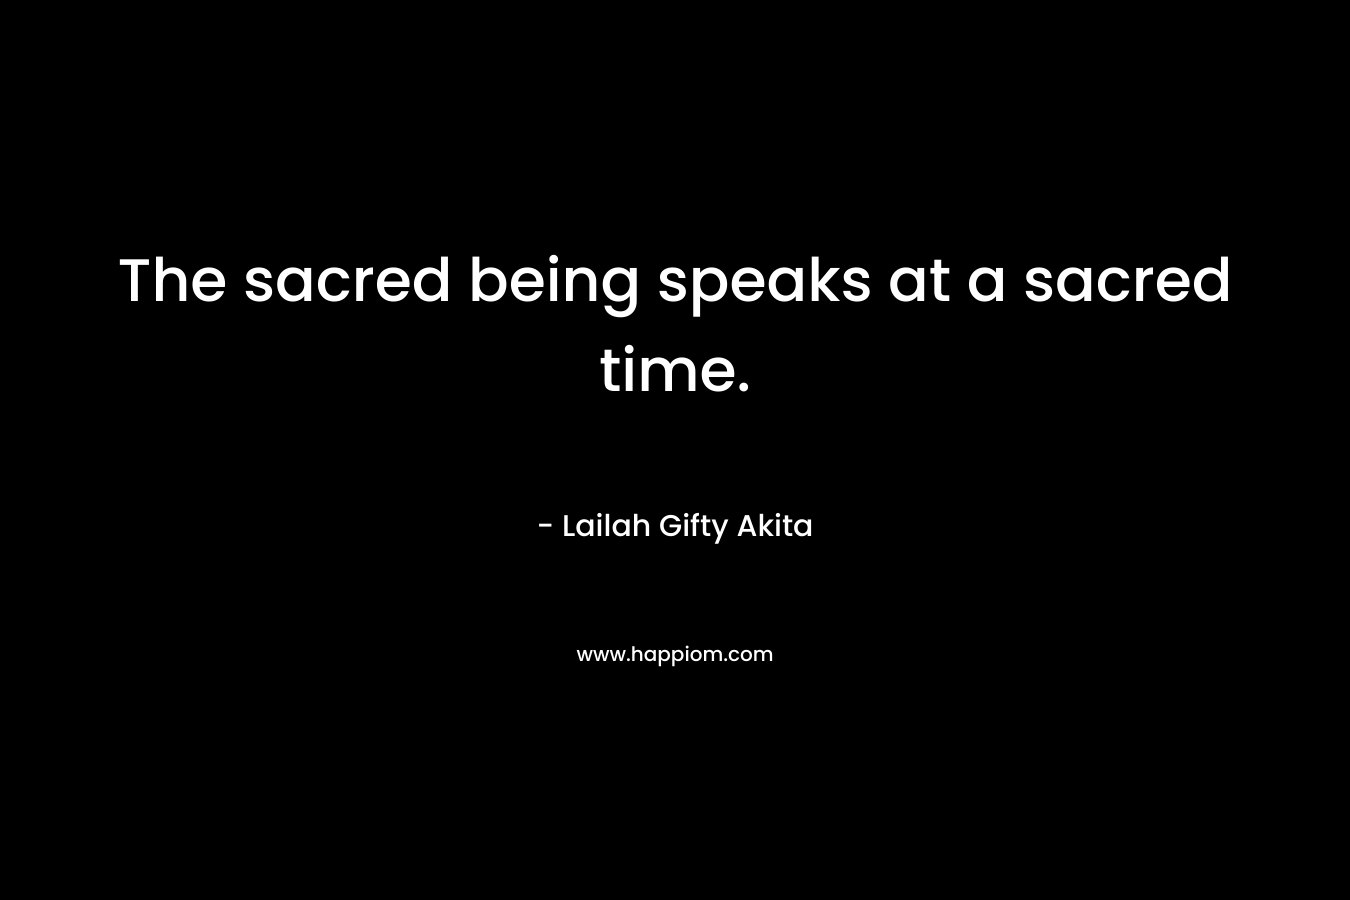 The sacred being speaks at a sacred time.